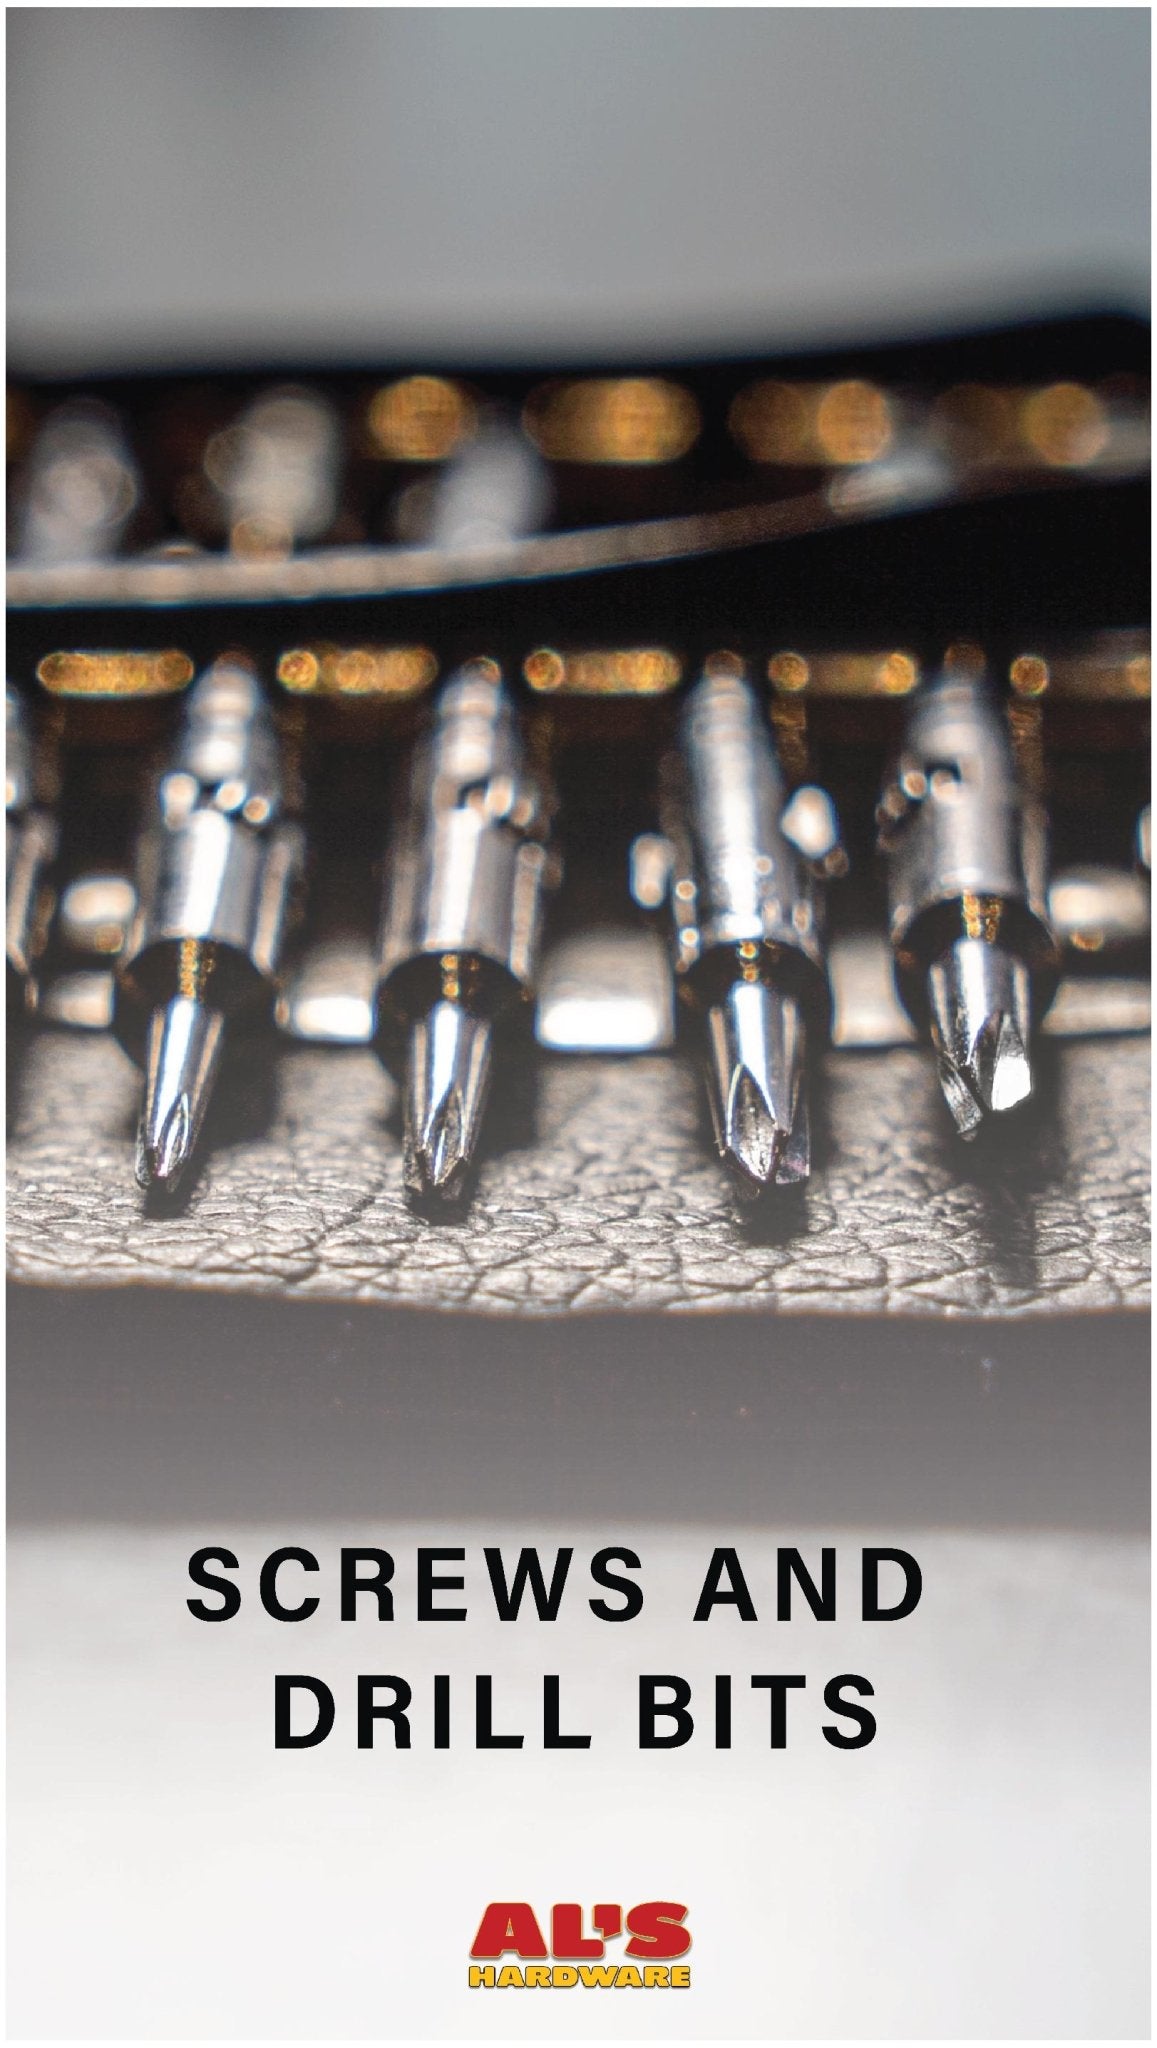 SCREWS AND DRILL BITS